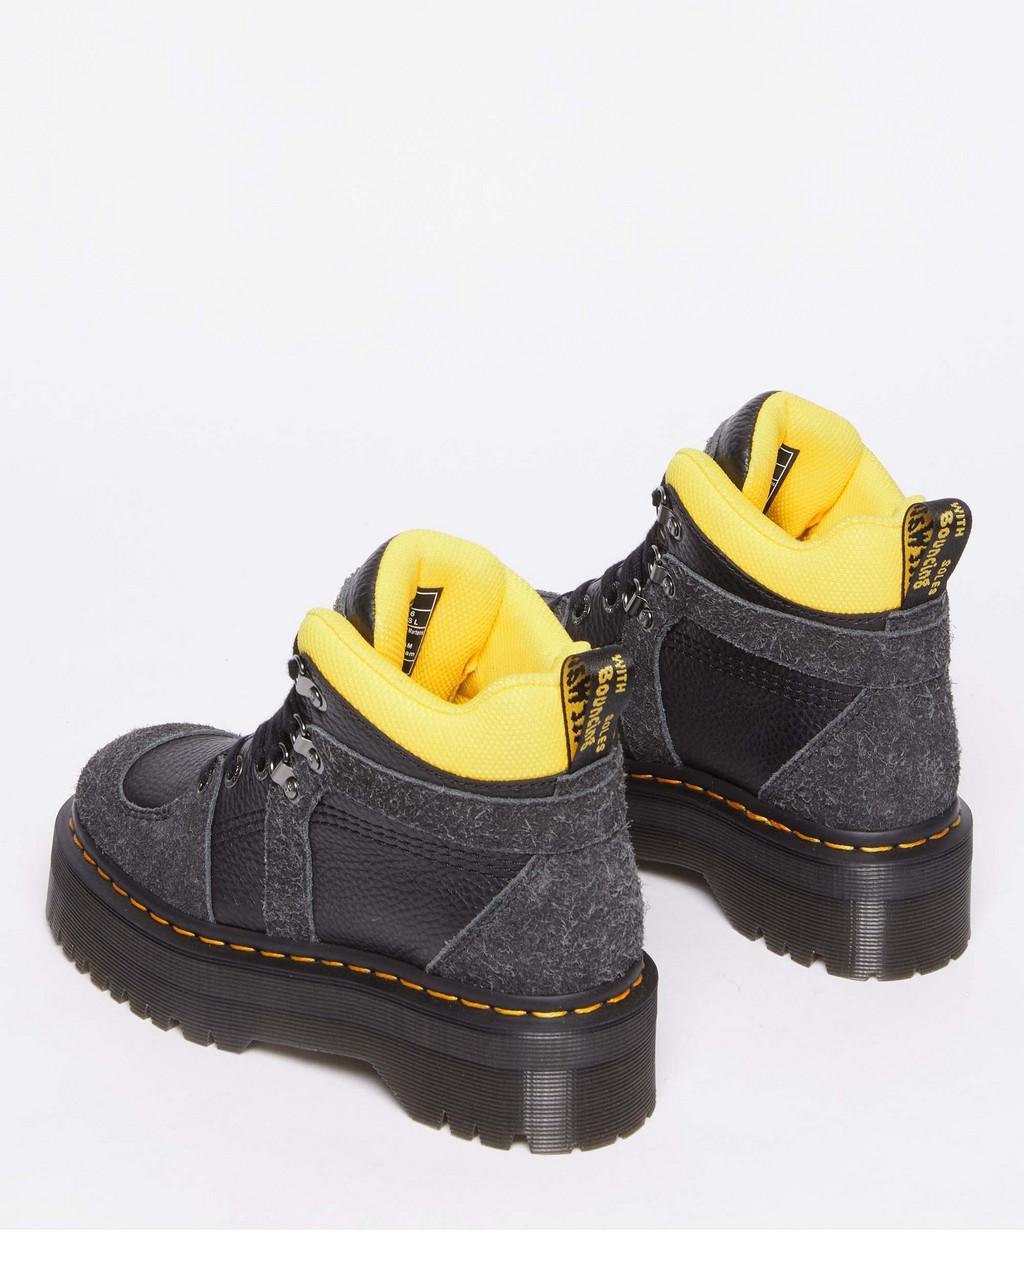 Dr. Martens Zuma Milled Nappa Leather & Suede Hiker Style Boots in Black |  Lyst